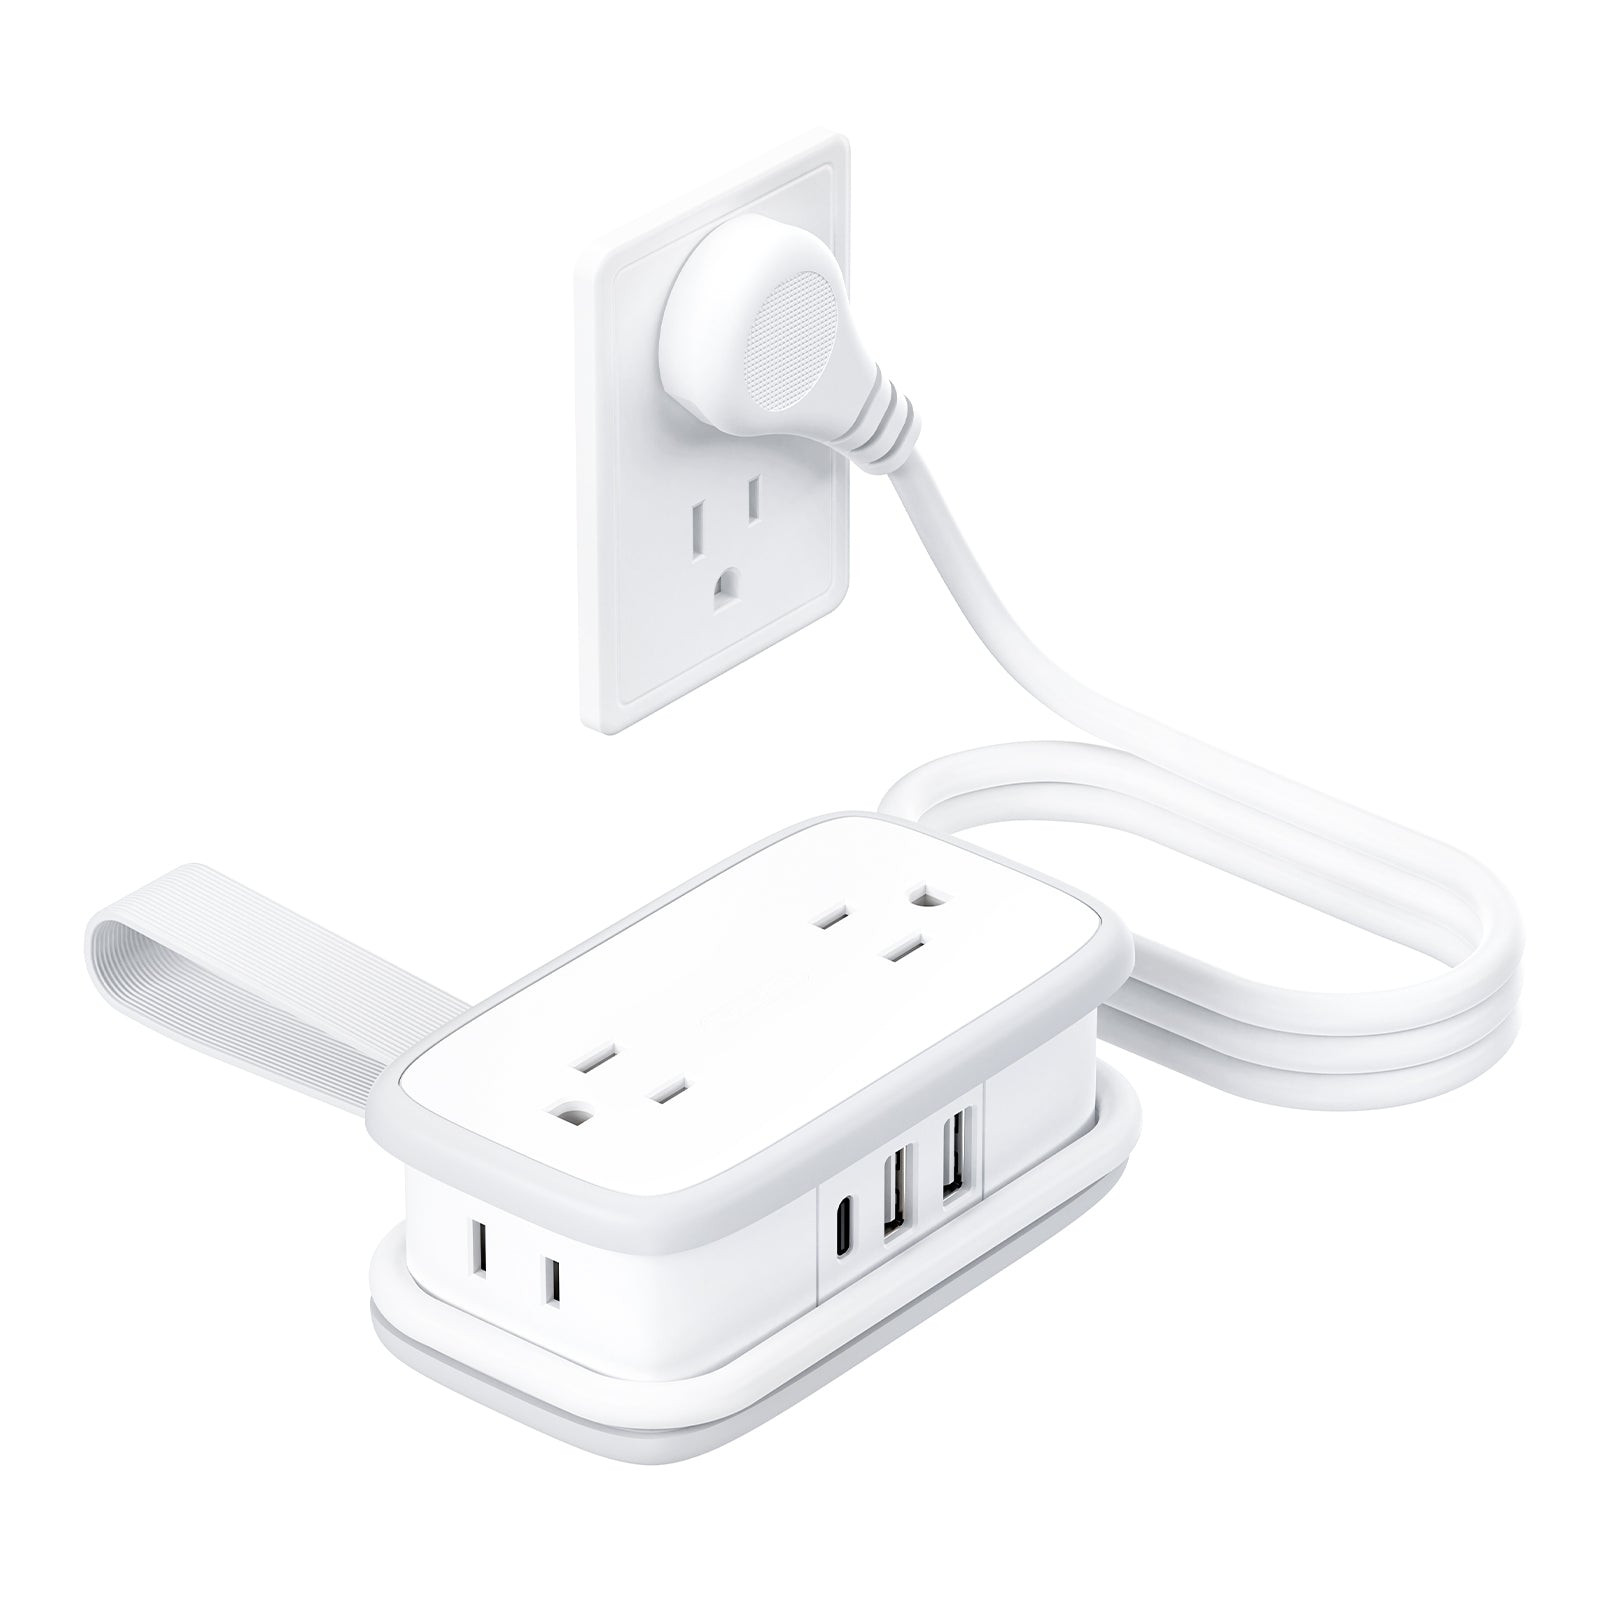 Ntonpower Pocket Power Strip 4 Outlets 3 USB Ports